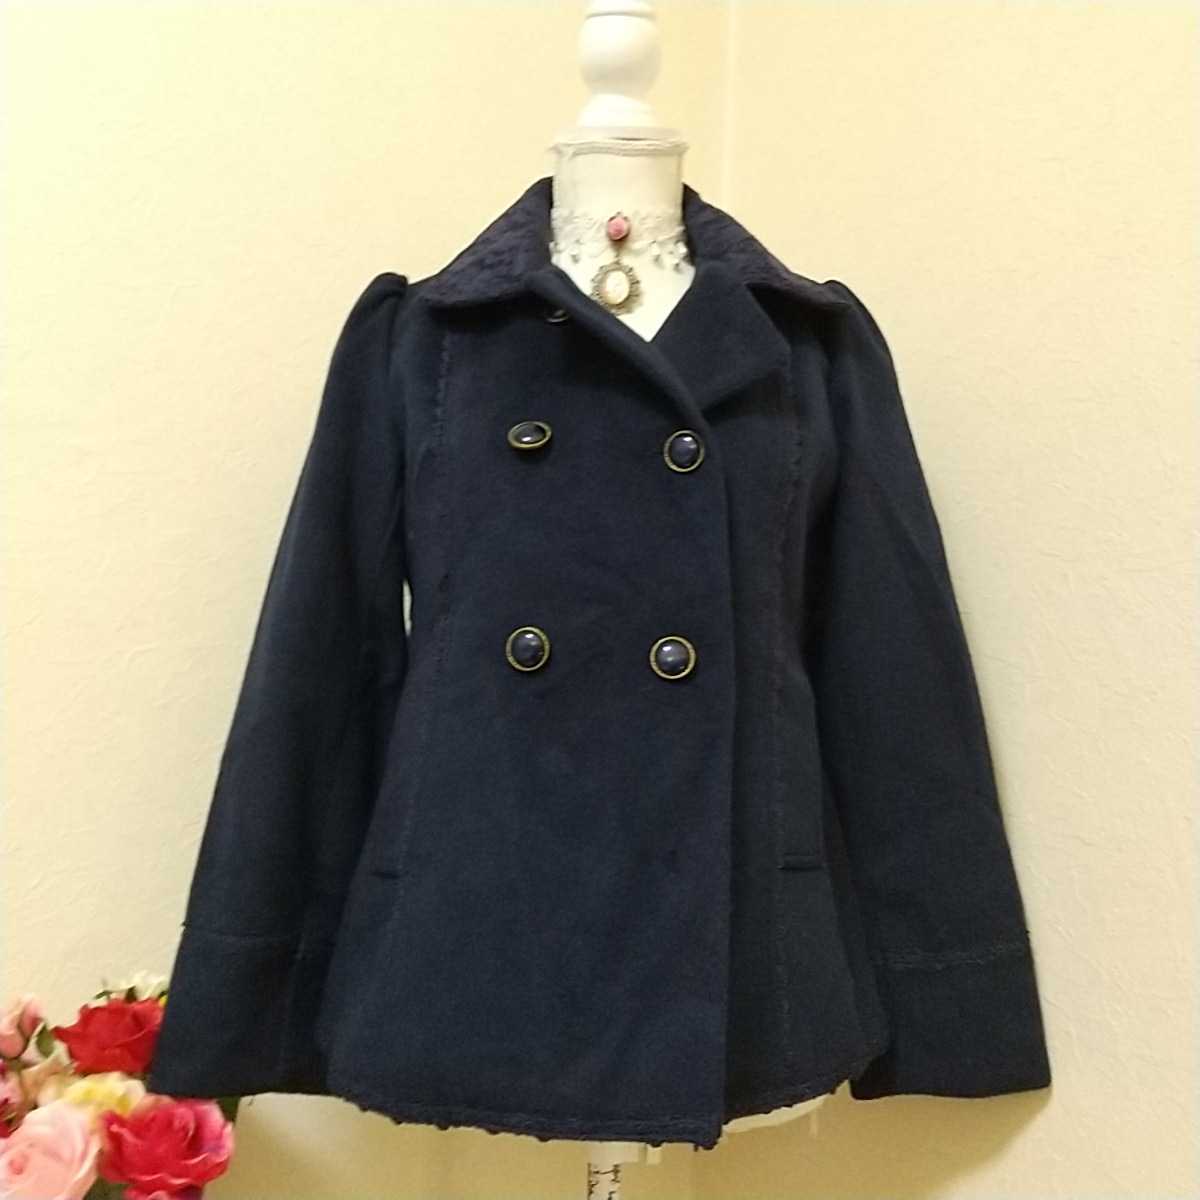 ( new goods ) winter thing liquidation!axesfemme change button attaching ... race collar race decoration stitch gold . button ....~. wool style pea coat navy blue color size M**